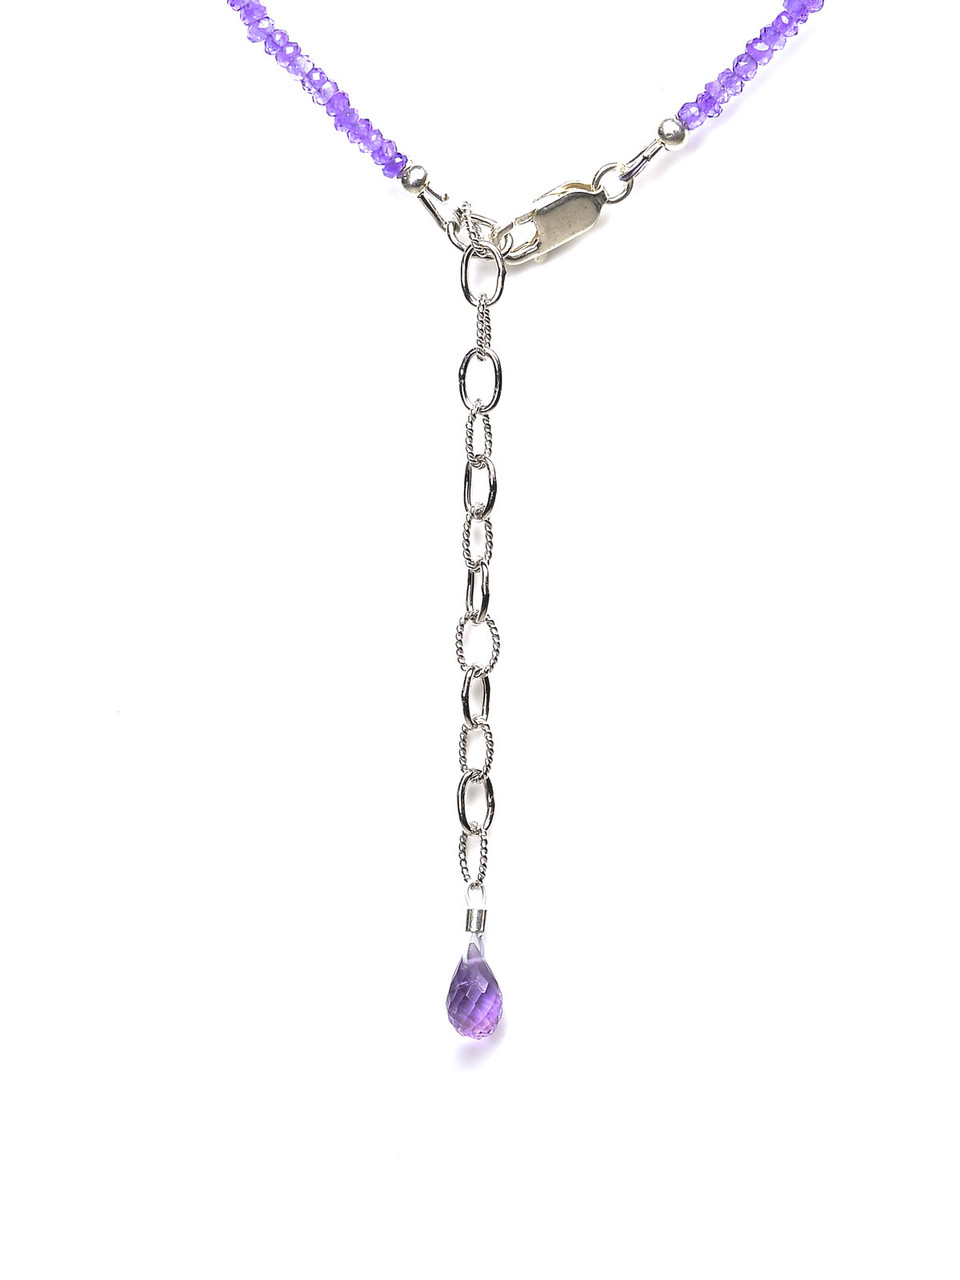 Amethyst Rondelle Necklace - Exquisite Crystals